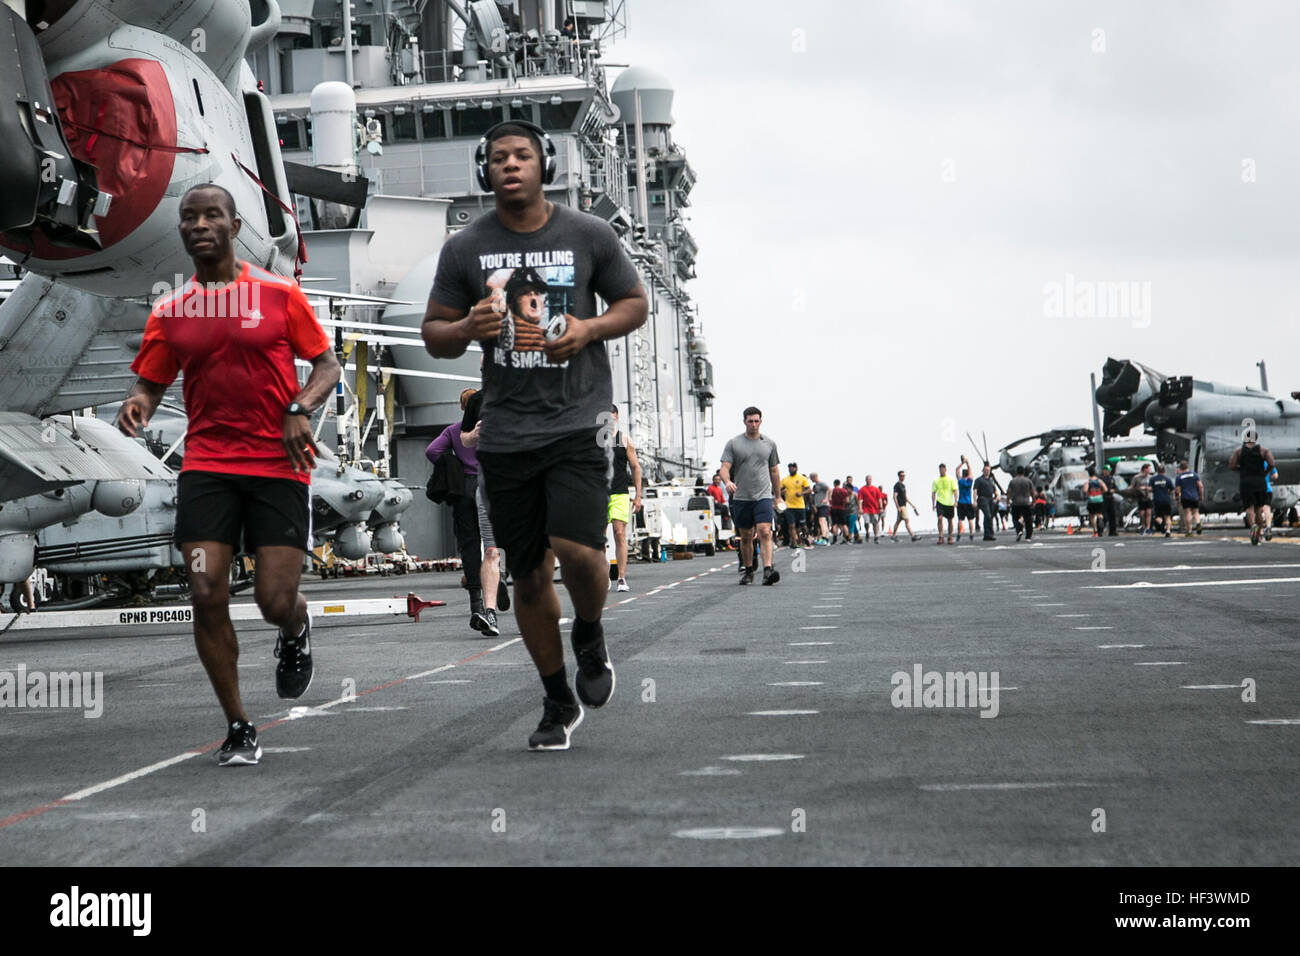 At sea. (March 27, 2016)-U.S. Sailor Capt. Keith Moore, Commodore of Boxer Amphibious Ready Group, runs with Cpl. James Rodgers, 13th Marine Expeditionary Unit, in a 5k run for women's history month, March 27, 2016, during the MEU's western pacific deployment aboard the USS Boxer. More then 4,500 Marines and Sailors from the Boxer ARG, 13th MEU team are currently transiting the Pacific Ocean toward the U.S. 5th fleet area of operations during a scheduled deployment. (U.S. Marine Corps photo by Sgt. Briauna Birl/RELEASED) Women's History 5k aboard USS Boxer 160327-M-KR317-218 Stock Photo